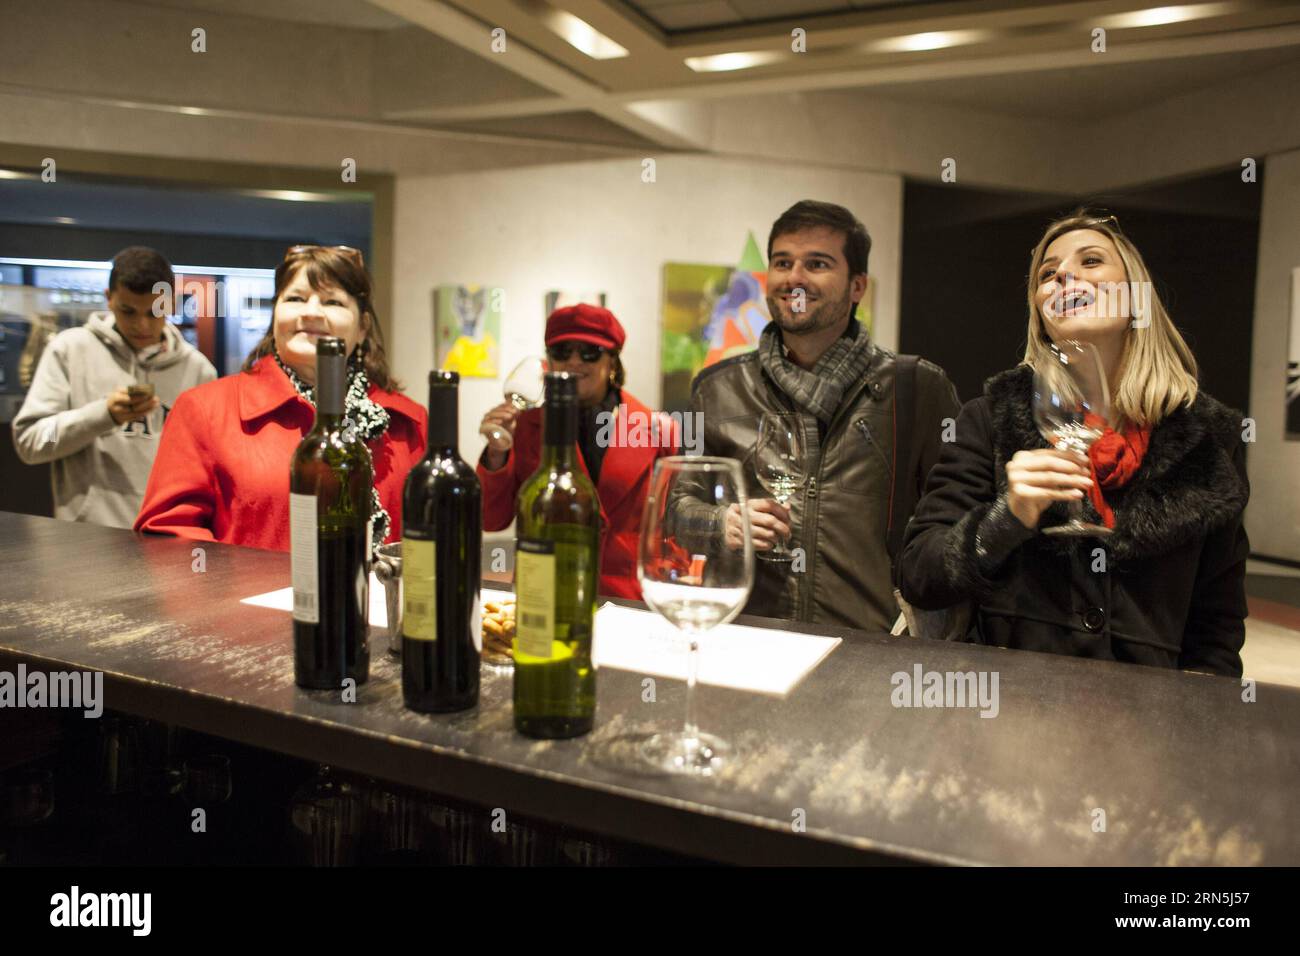 Image taken on June 25, 2015 shows visitors taking part in a wine tasting in the tasting room of the O. Fournier Winery, in La Consulta city, Mendoza province, 1,170km away of Buenos Aires city, Argentina. ) (jg) (da) ARGENTINA-MENDOZA-INDUSTRY-WINE-FEATURE MARTINxZABALA PUBLICATIONxNOTxINxCHN   Image Taken ON June 25 2015 Shows Visitors Taking Part in a Wine Tasting in The Tasting Room of The O Fournier Winery in La CONSULTA City Mendoza Province 1 170km Away of Buenos Aires City Argentina JG there Argentina Mendoza Industry Wine Feature MartinXZabala PUBLICATIONxNOTxINxCHN Stock Photo